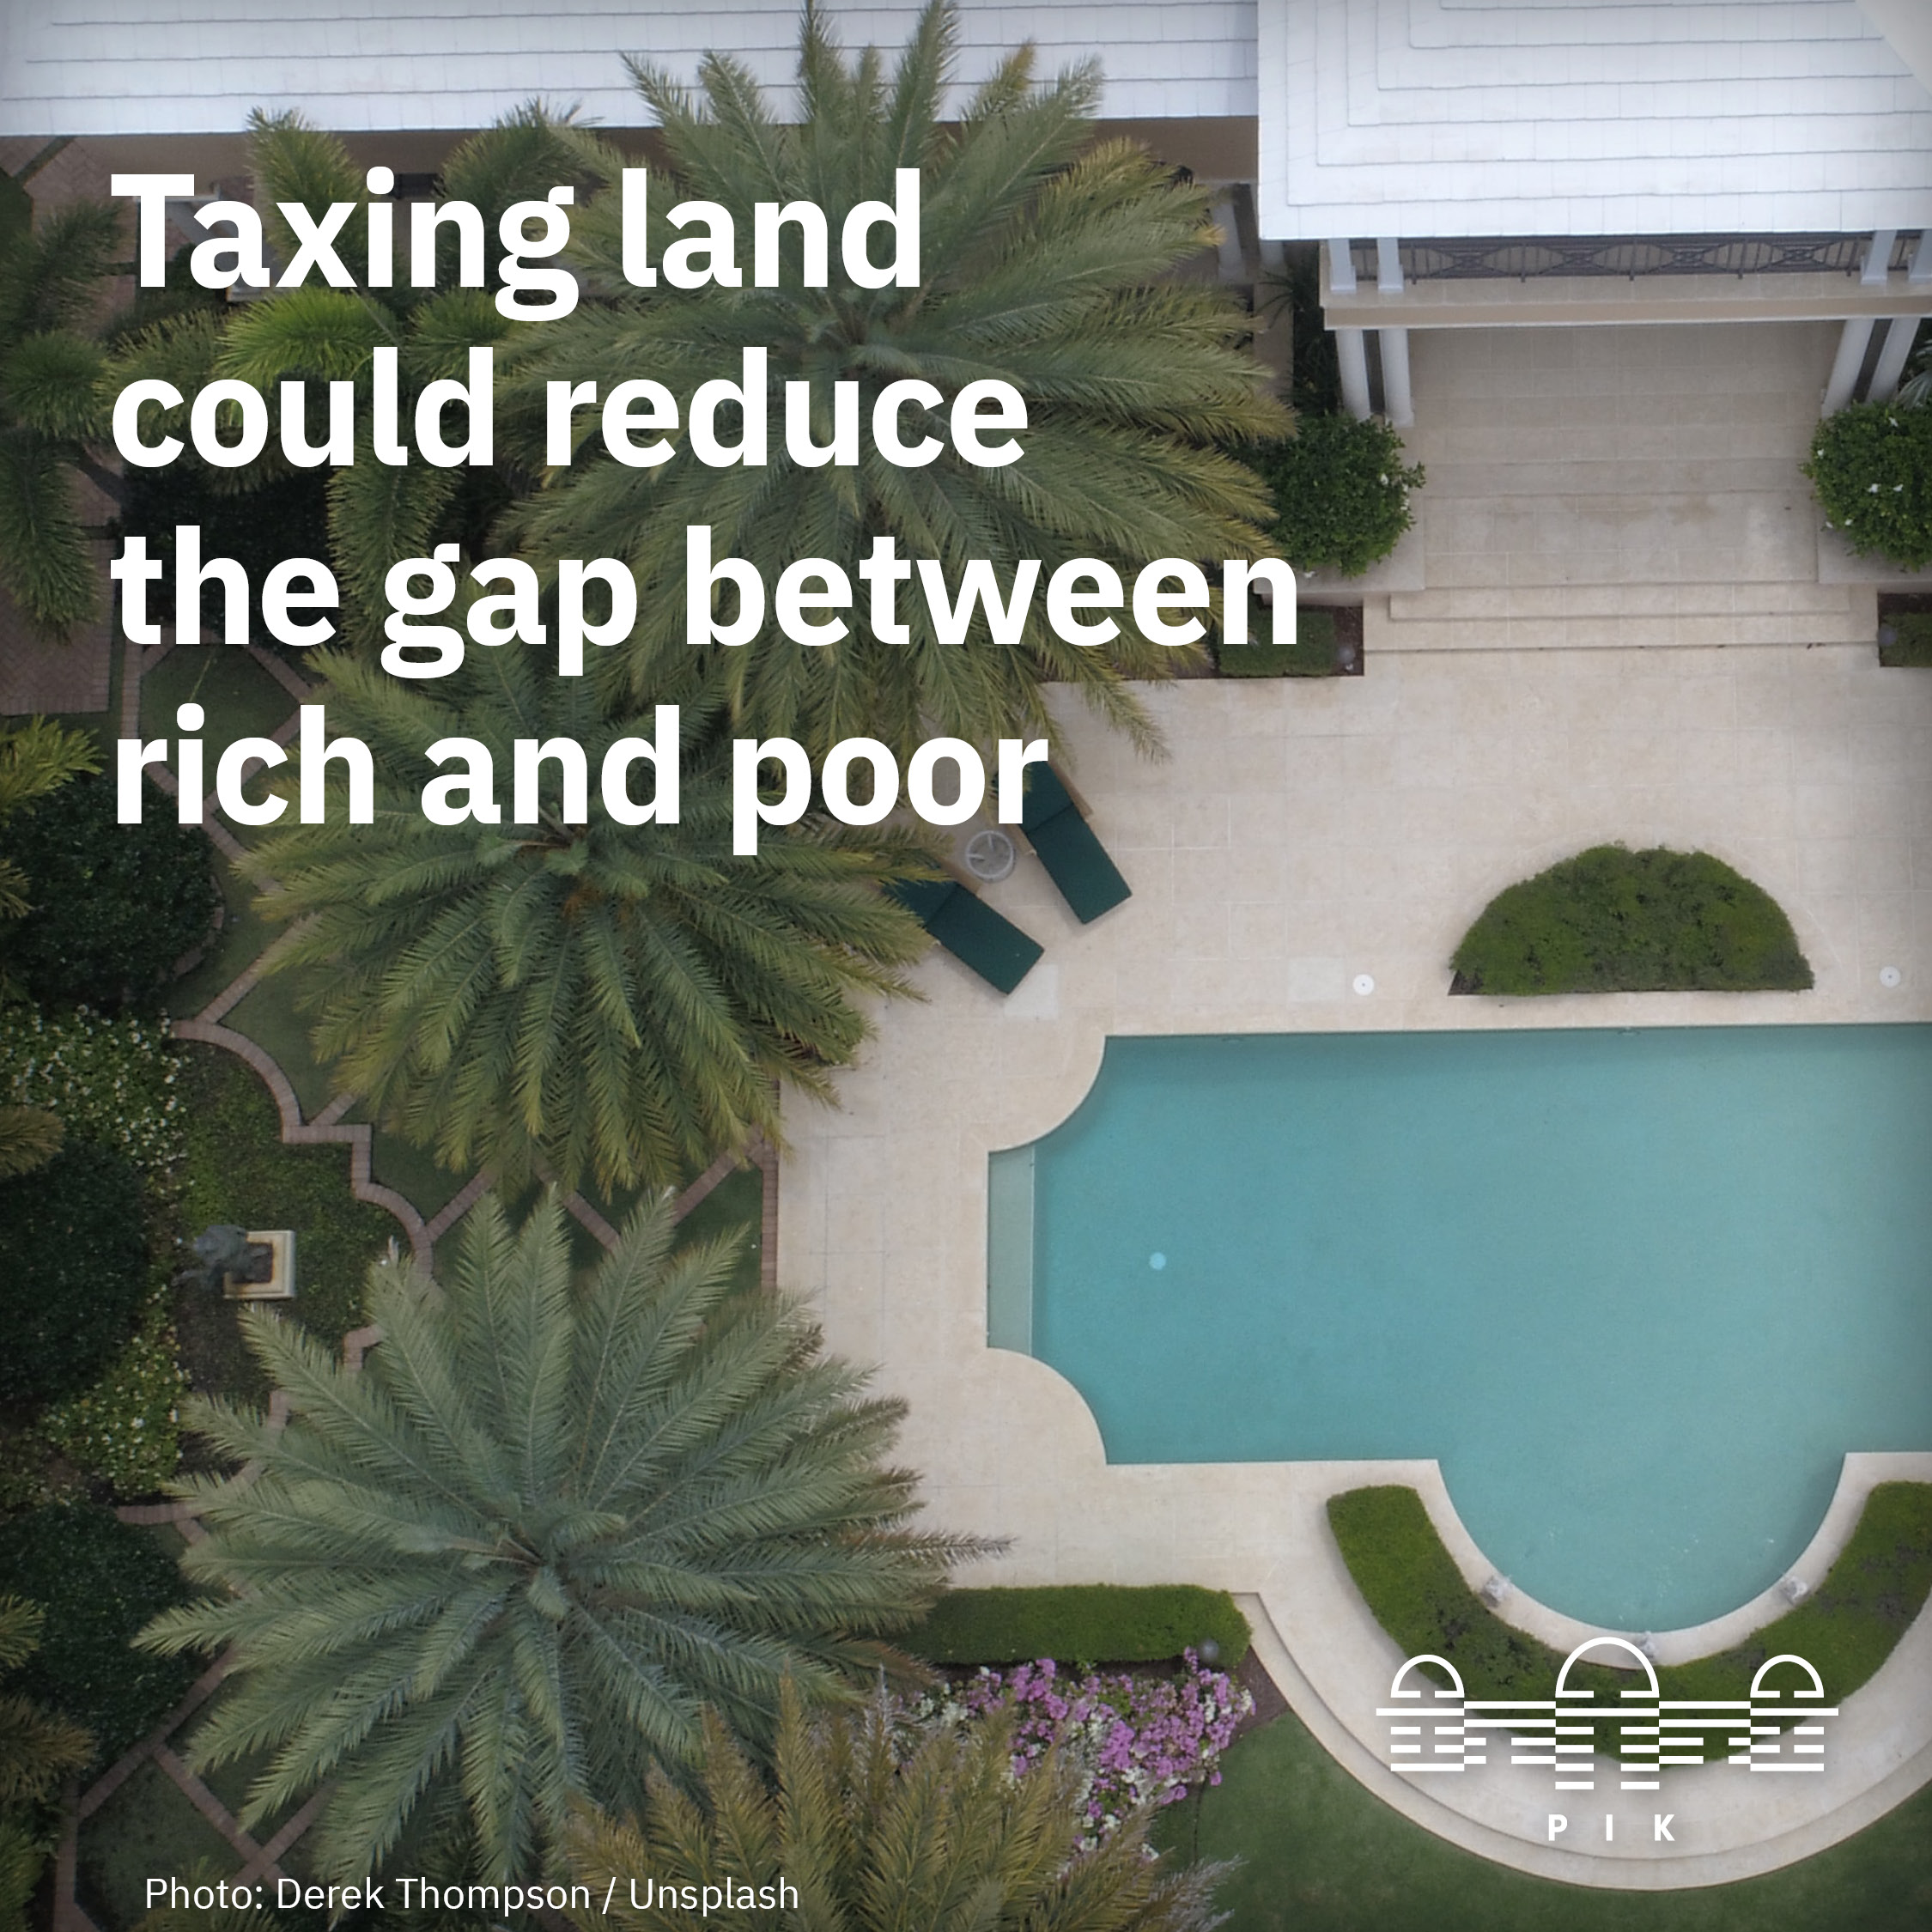 Taxing land can reduce wealth inequality